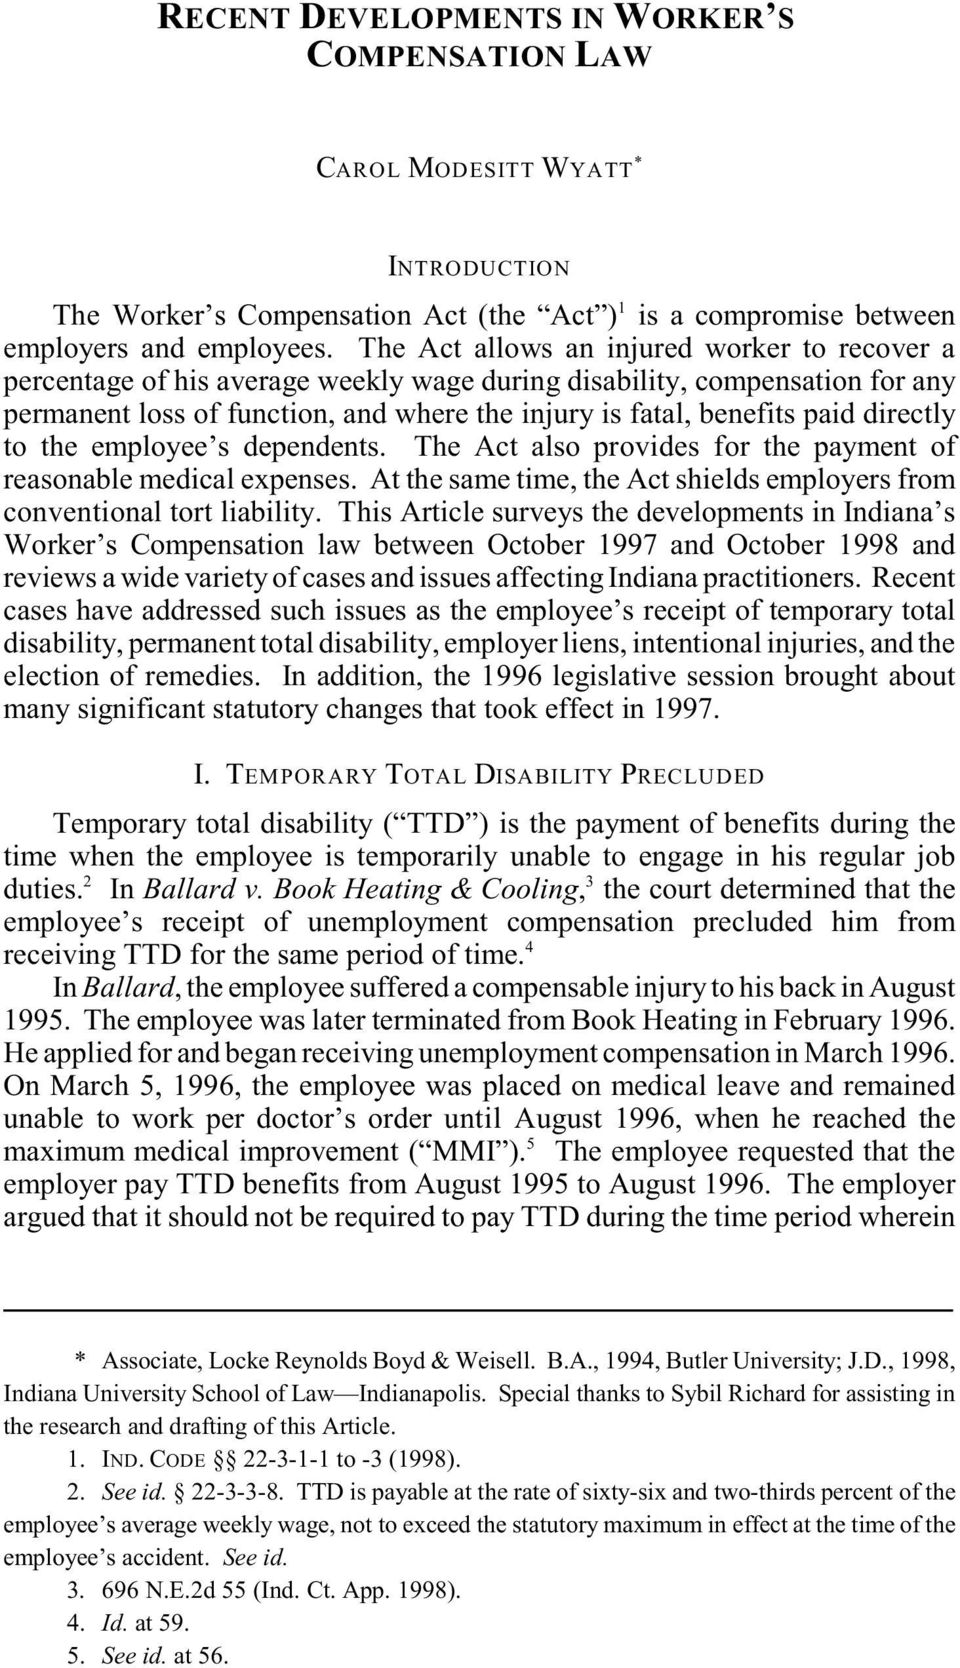 directly to the employee s dependents. The Act also provides for the payment of reasonable medical expenses. At the same time, the Act shields employers from conventional tort liability.